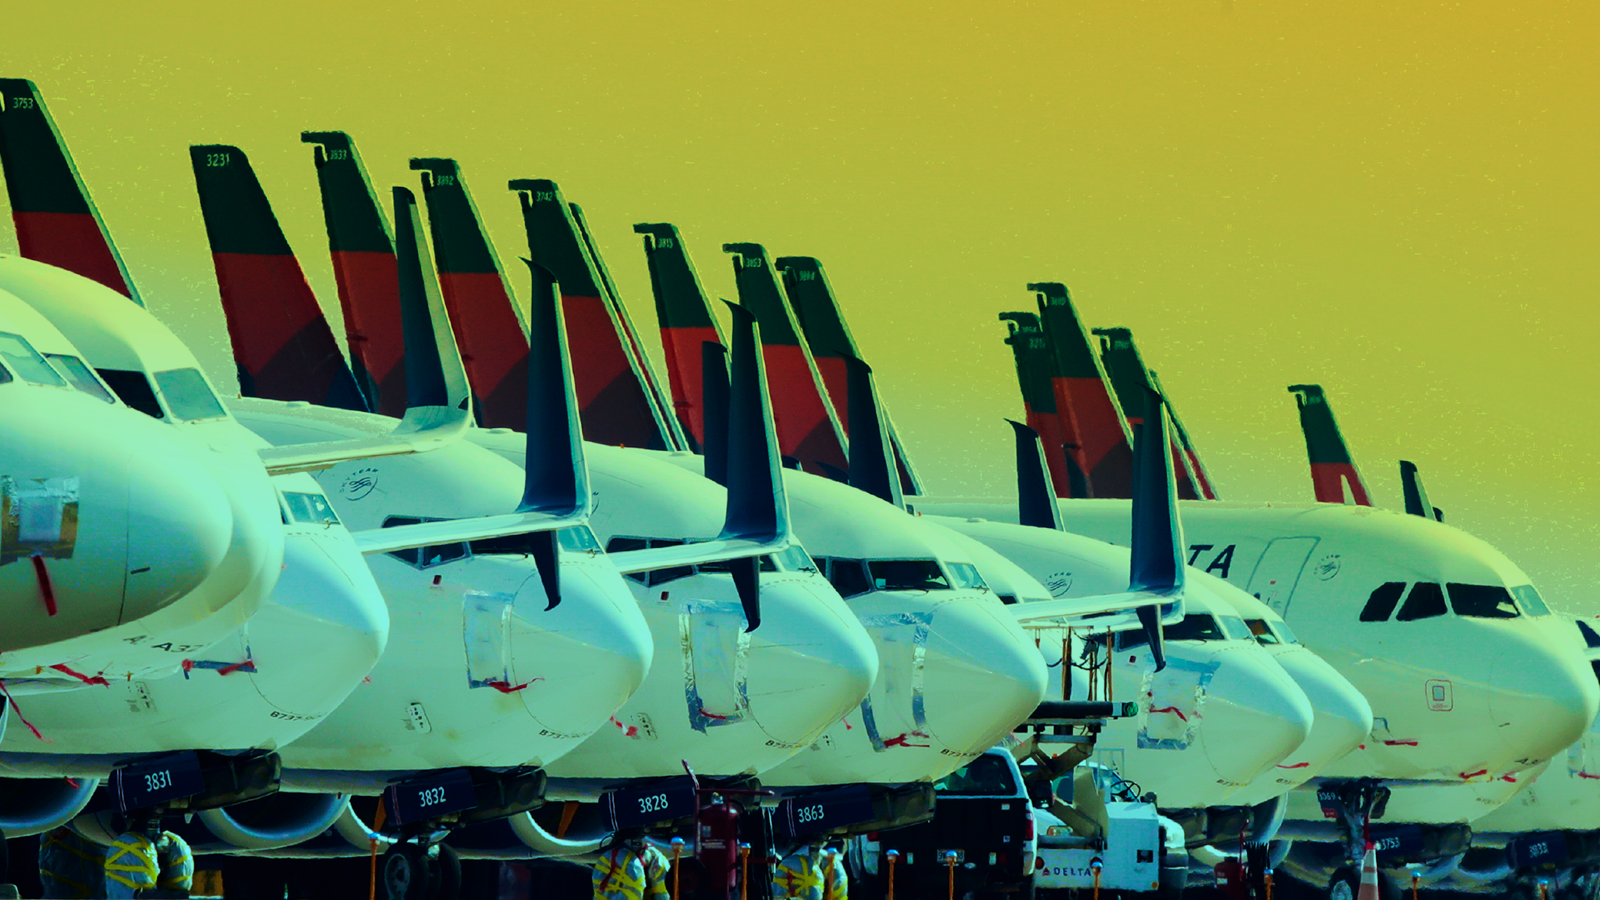 A line of Delta airplanes.